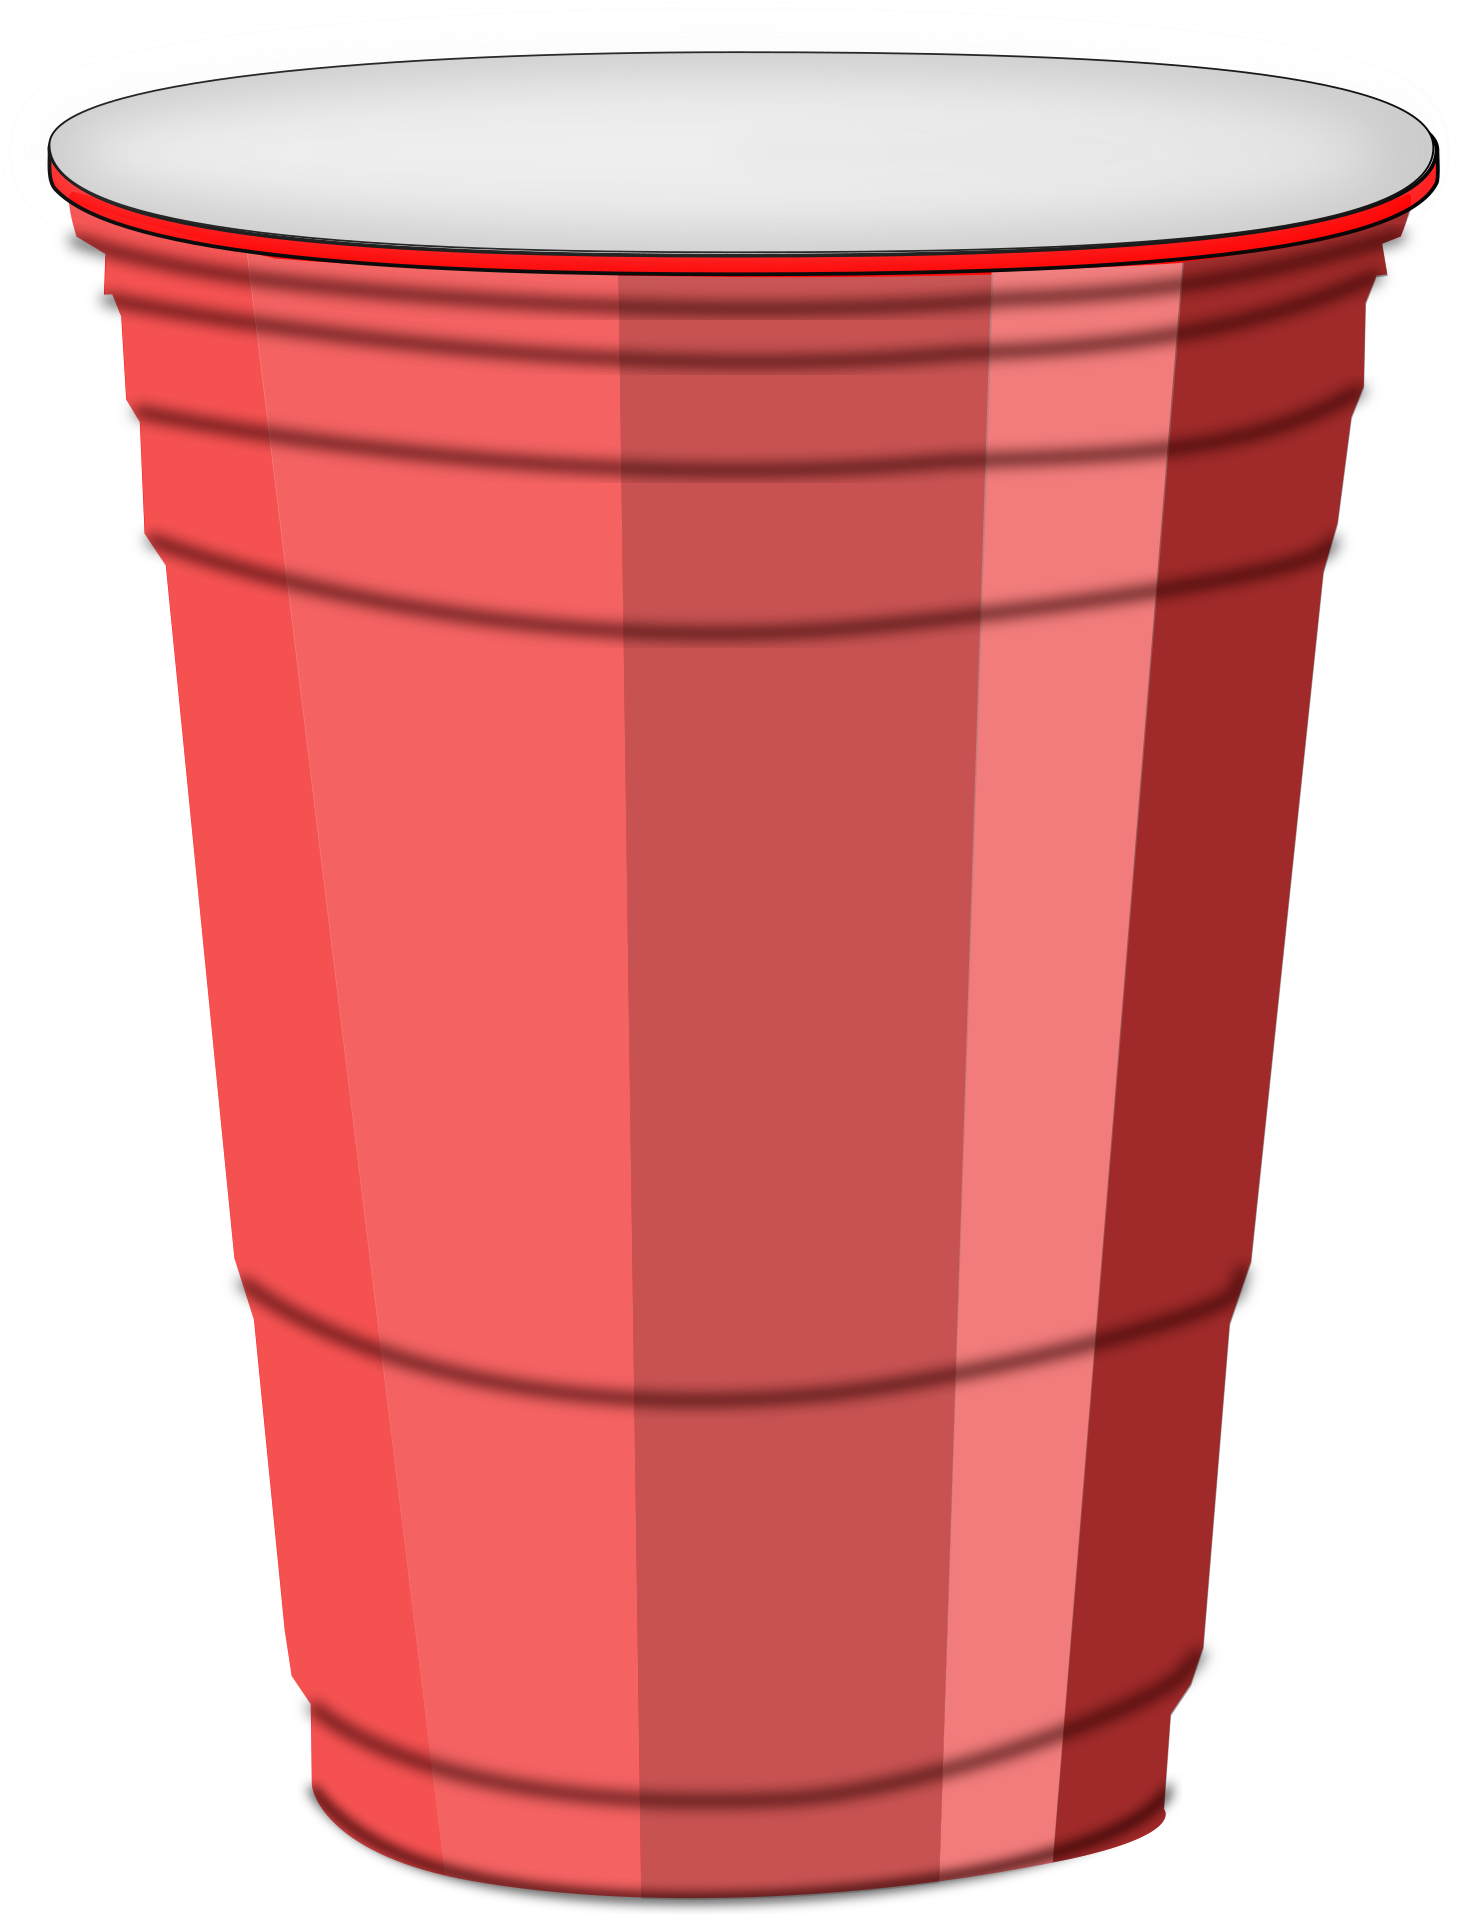 Big Image - Plastic Red Cup Png (1880x2400)